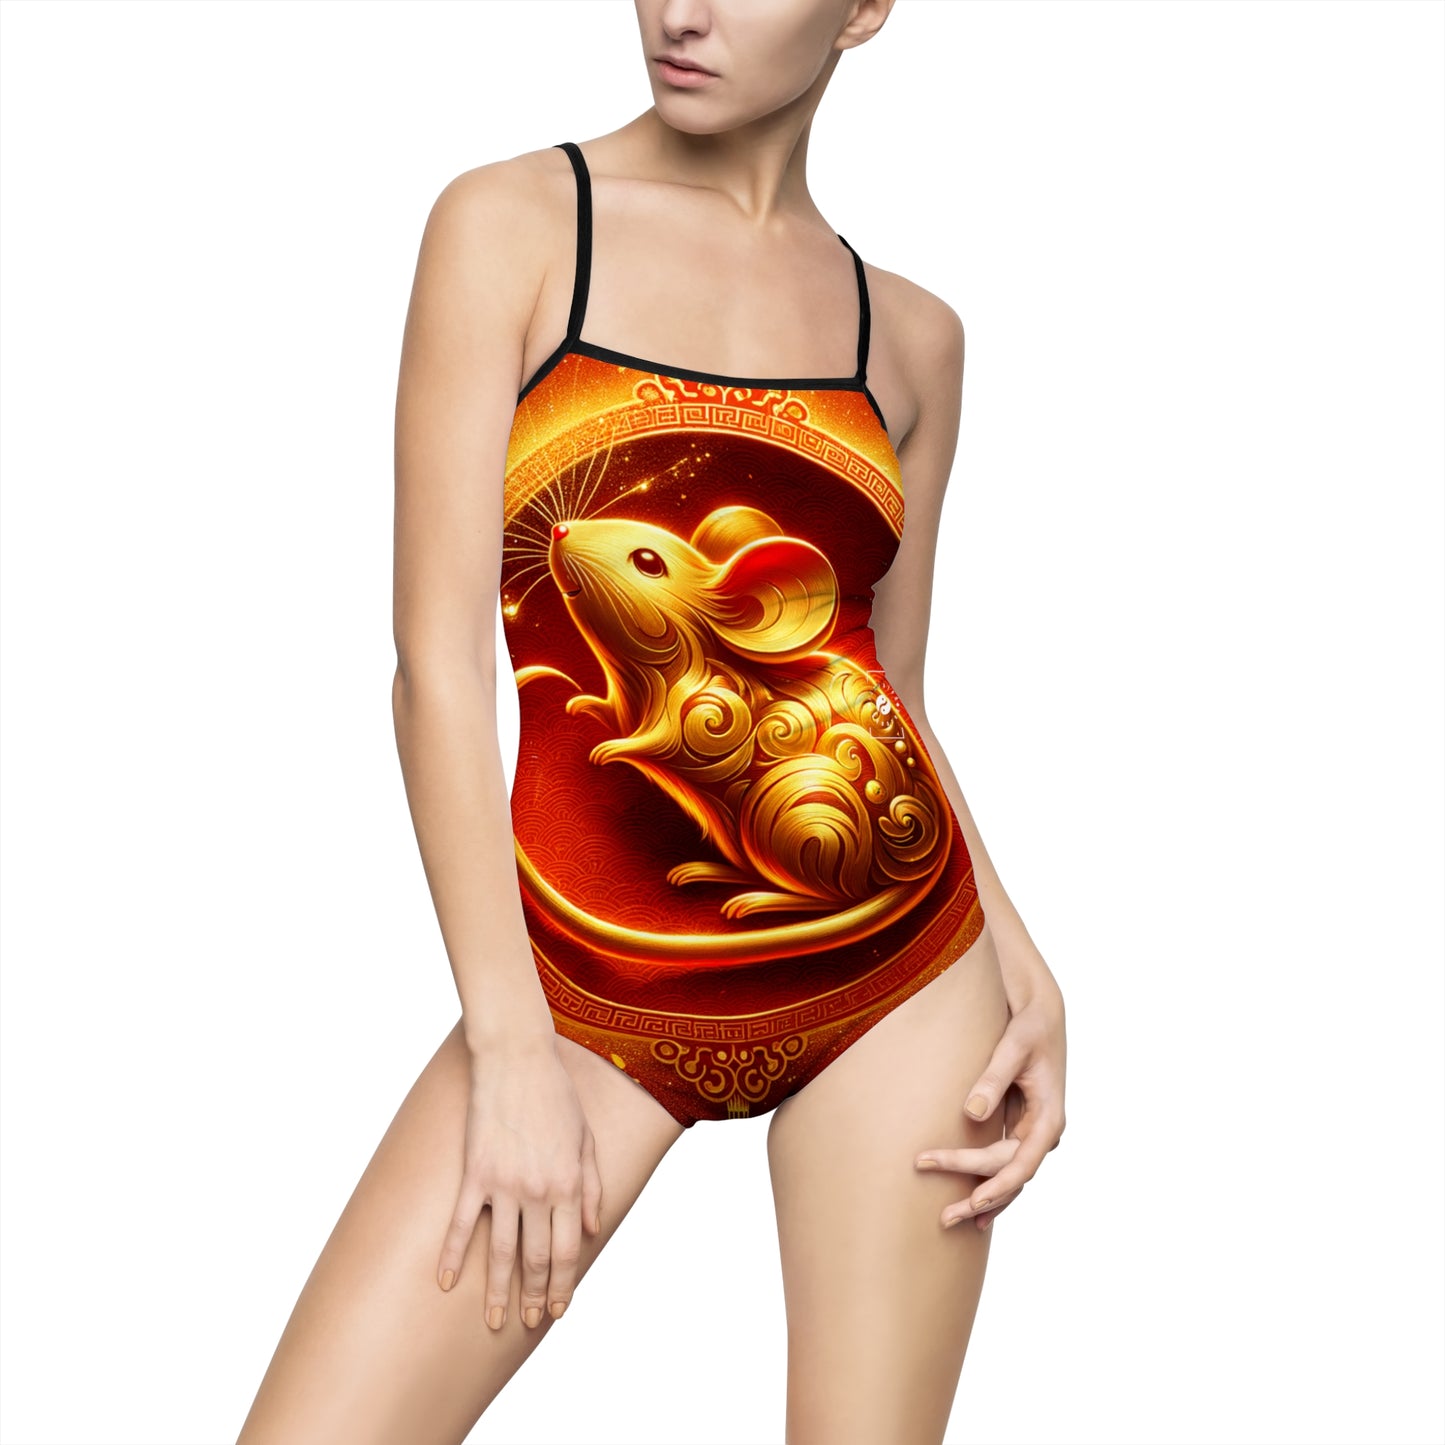 "Golden Emissary: A Lunar New Year's Tribute" - Openback Swimsuit